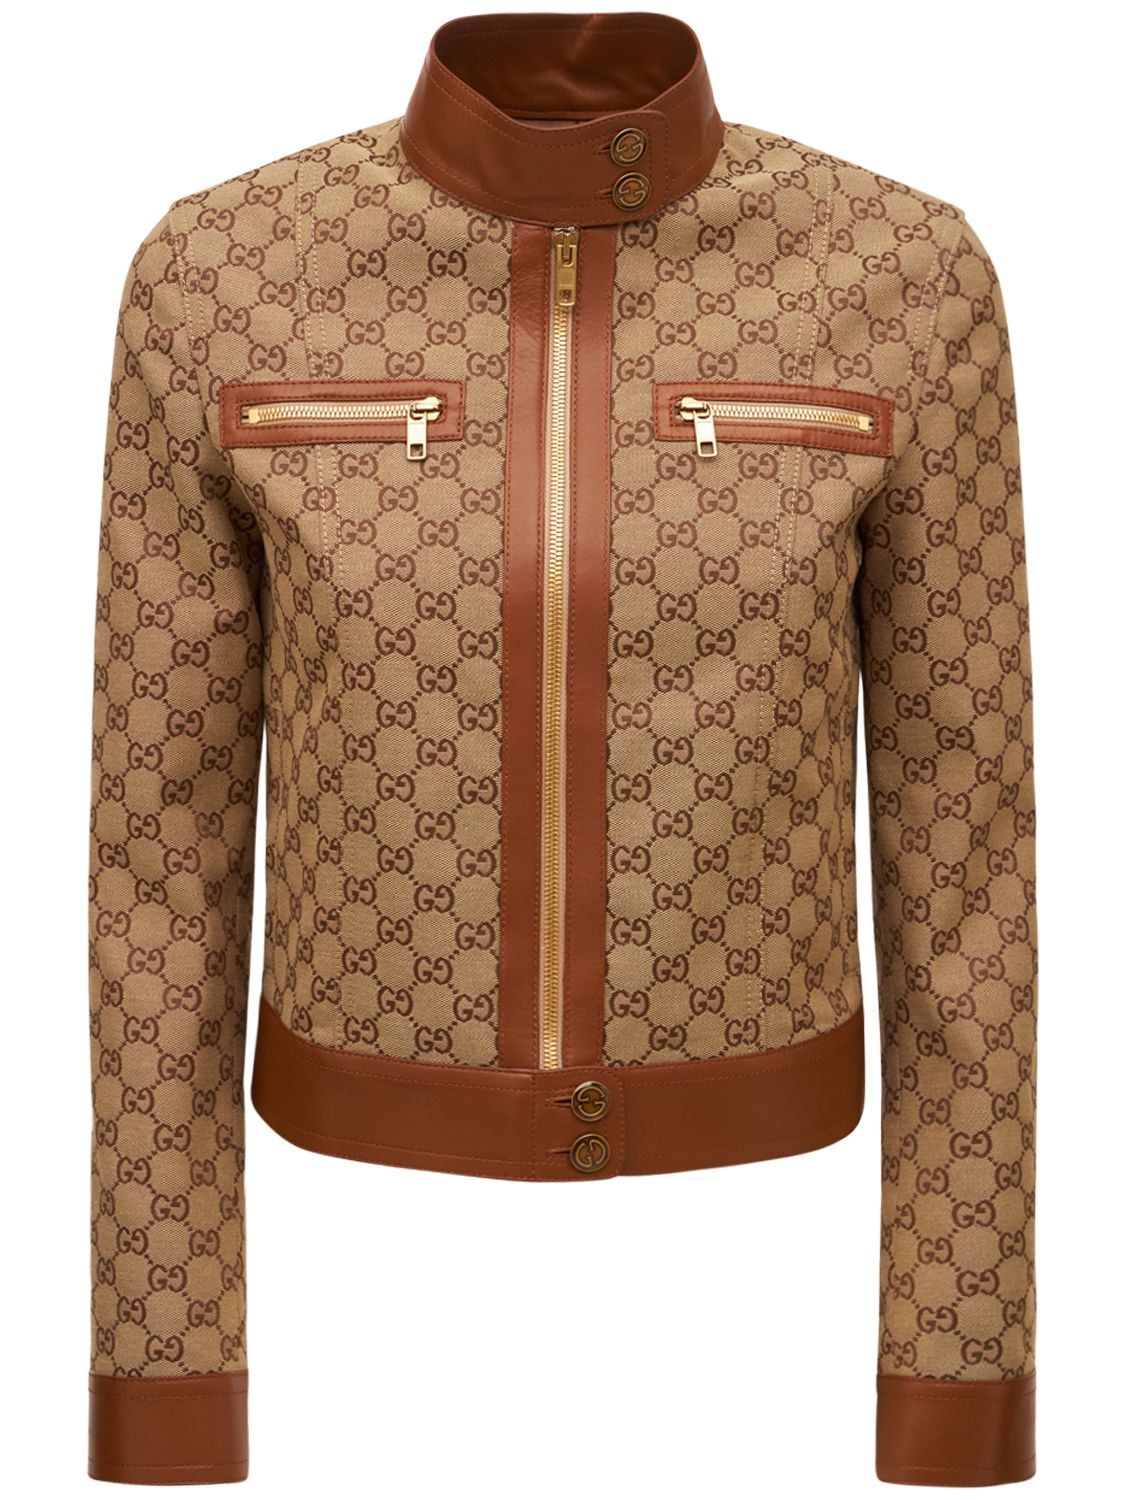 Gucci Love Life Is Gucci Lightweight Coat Casual Bomber Jacket - Tagotee